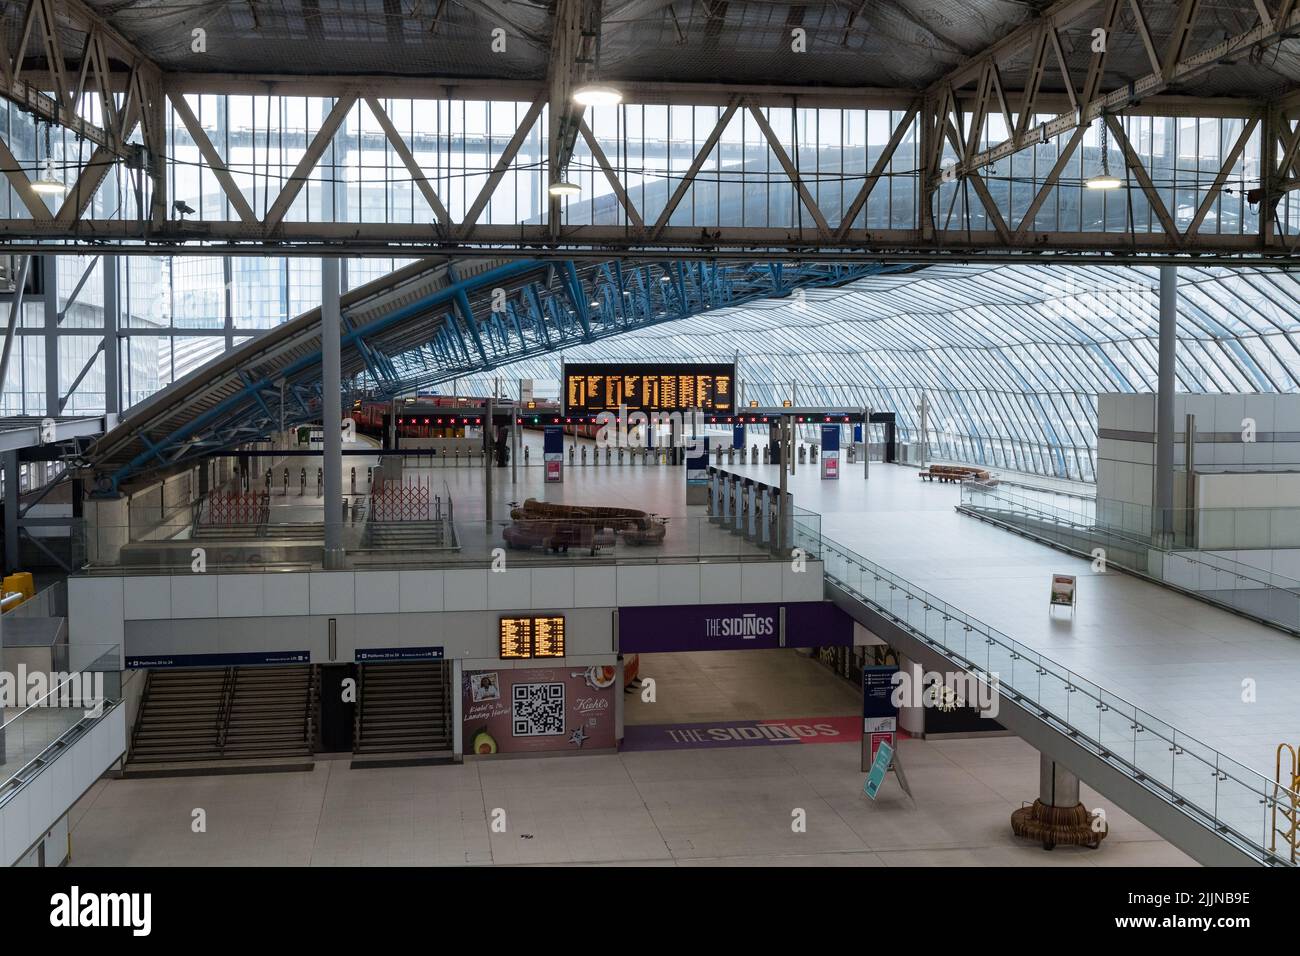 London, UK. 27th July, 2022. A view of an empty concourse at Waterloo station as railway workers stage a 24-hour walk-out. More than 40,000 workers from 14 train operating companies and Network Rail are taking part in the industrial action, called by the RMT (The National Union of Rail, Maritime and Transport Workers), as part of an ongoing dispute over pay, jobs and conditions following three days of strikes in June. Credit: Wiktor Szymanowicz/Alamy Live News Stock Photo